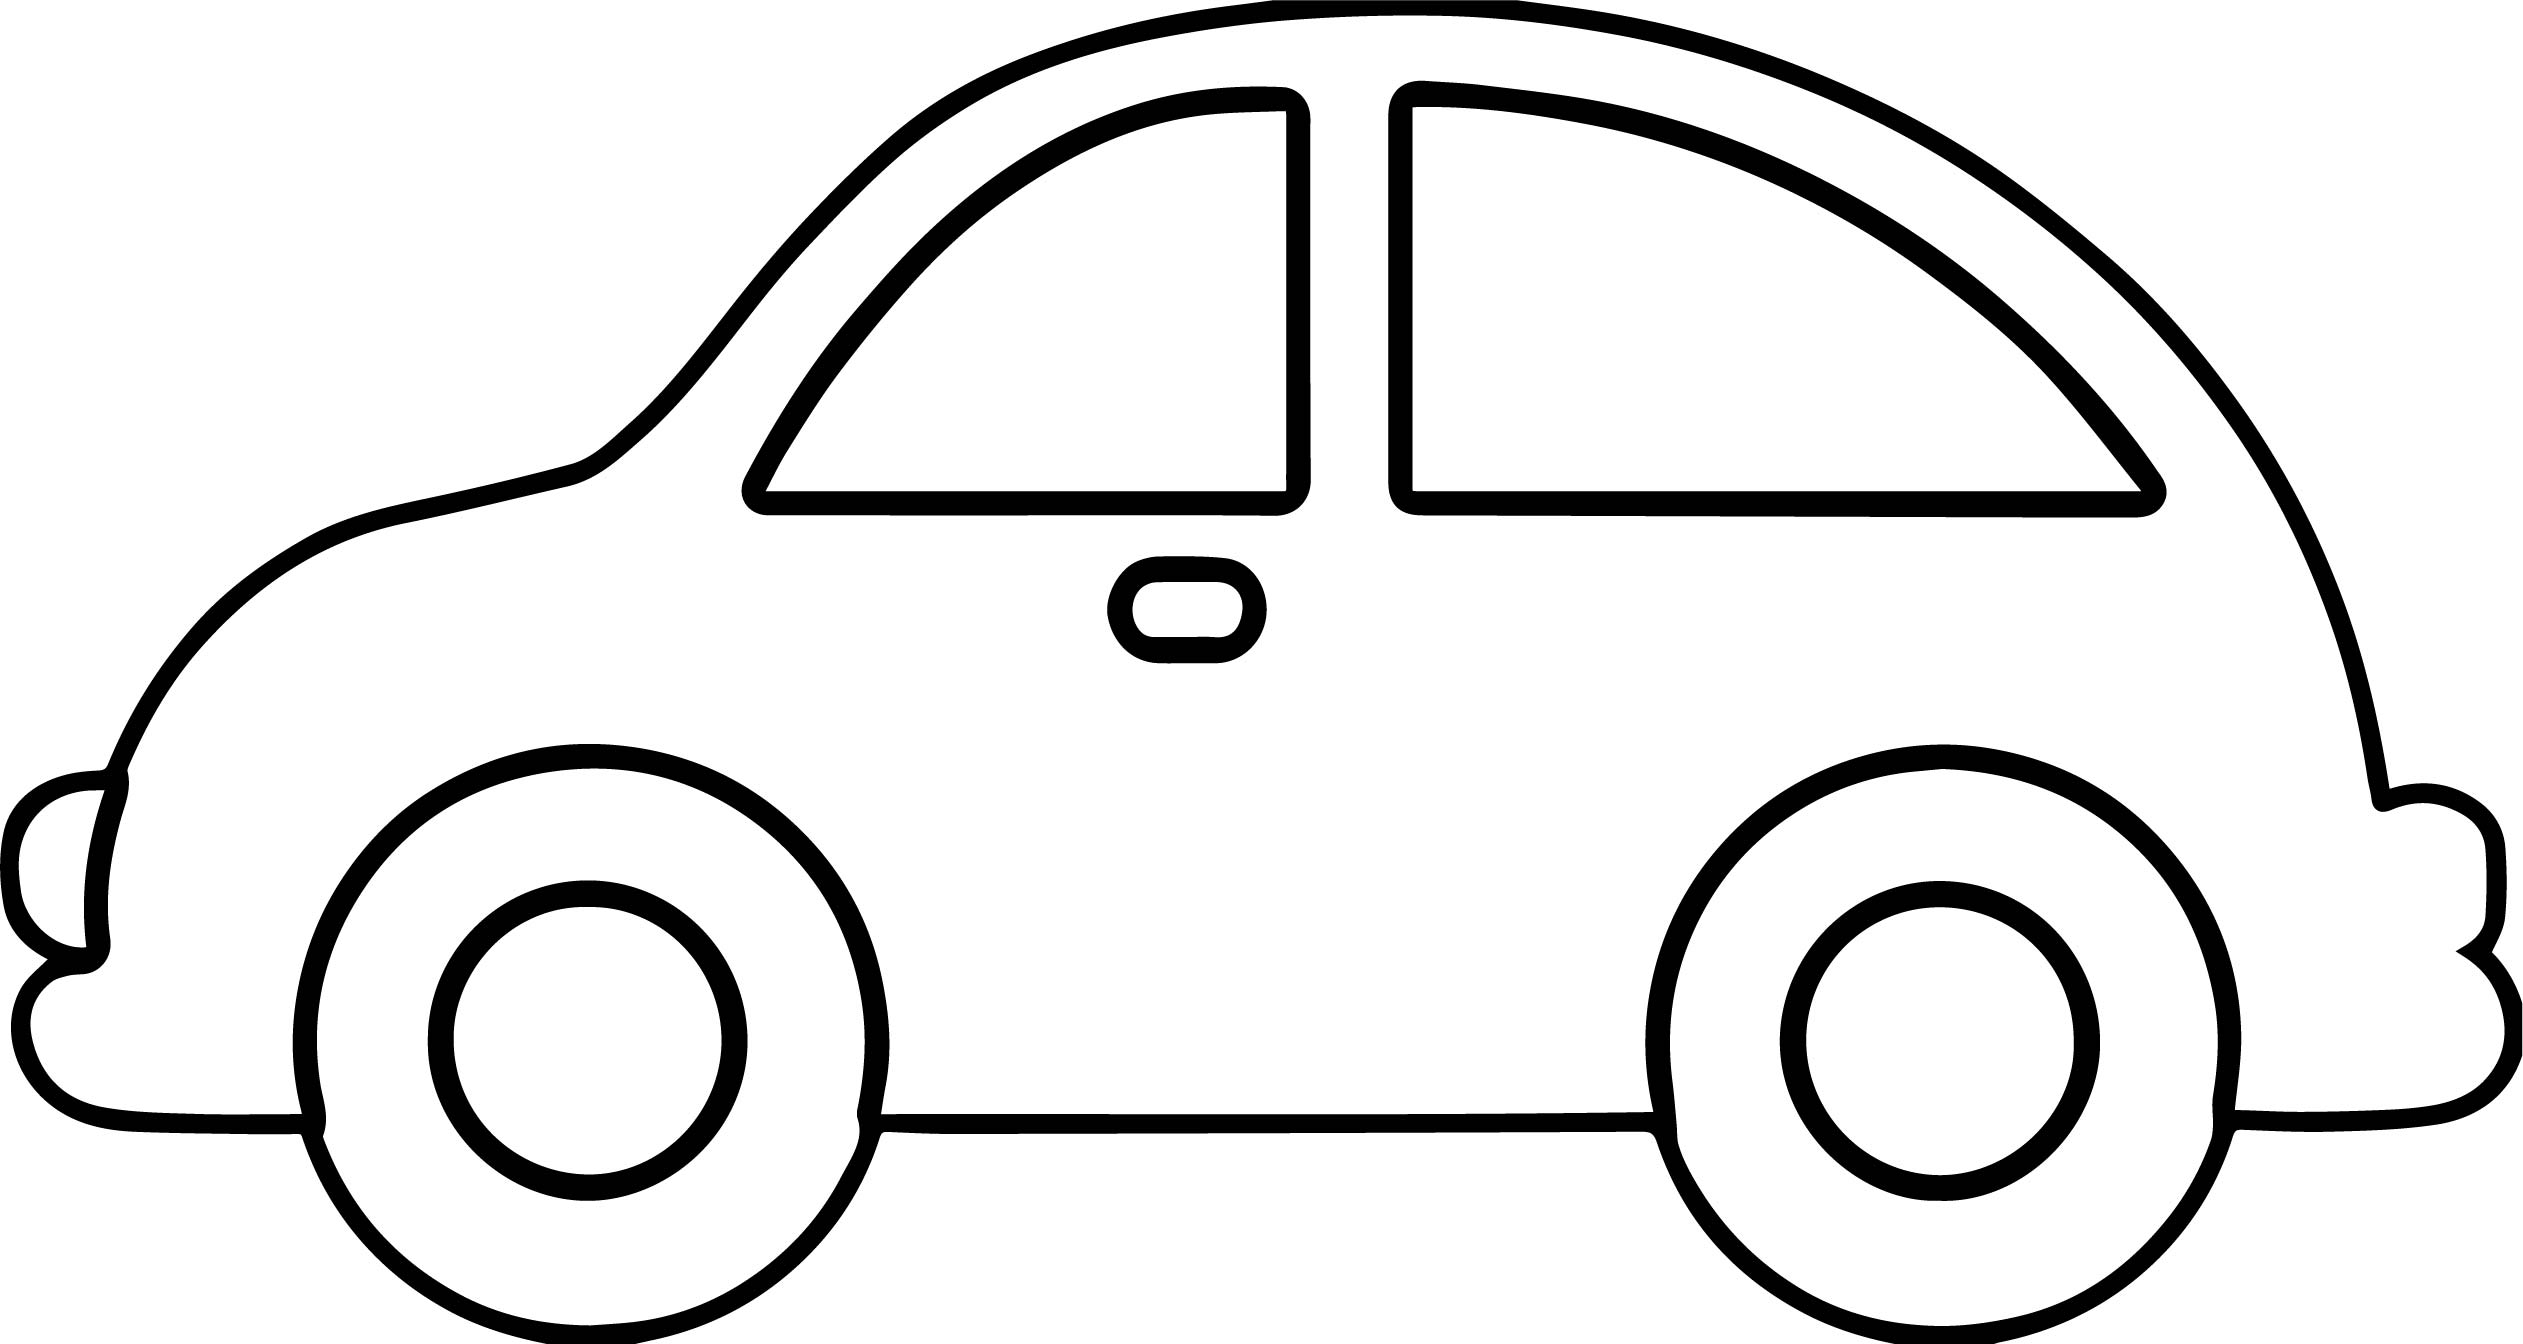 Car Outline | Free download on ClipArtMag